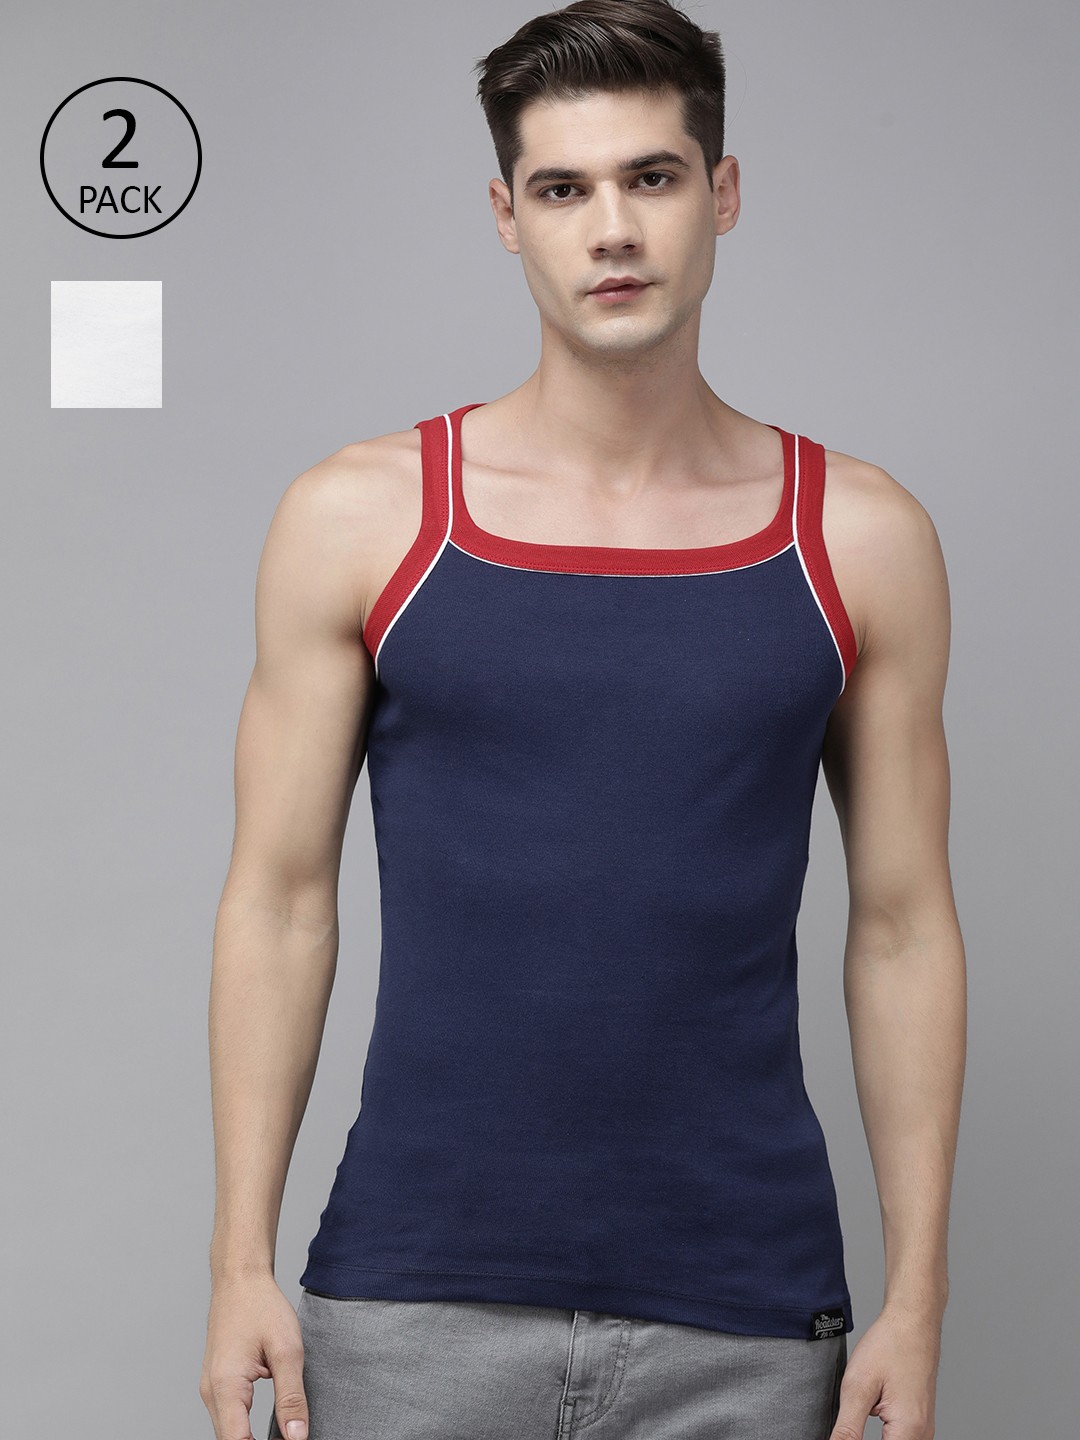 Clothing Innerwear Vests | Roadster Men Pack of 2 Solid Pure Cotton Innerwear Vests - MW89386